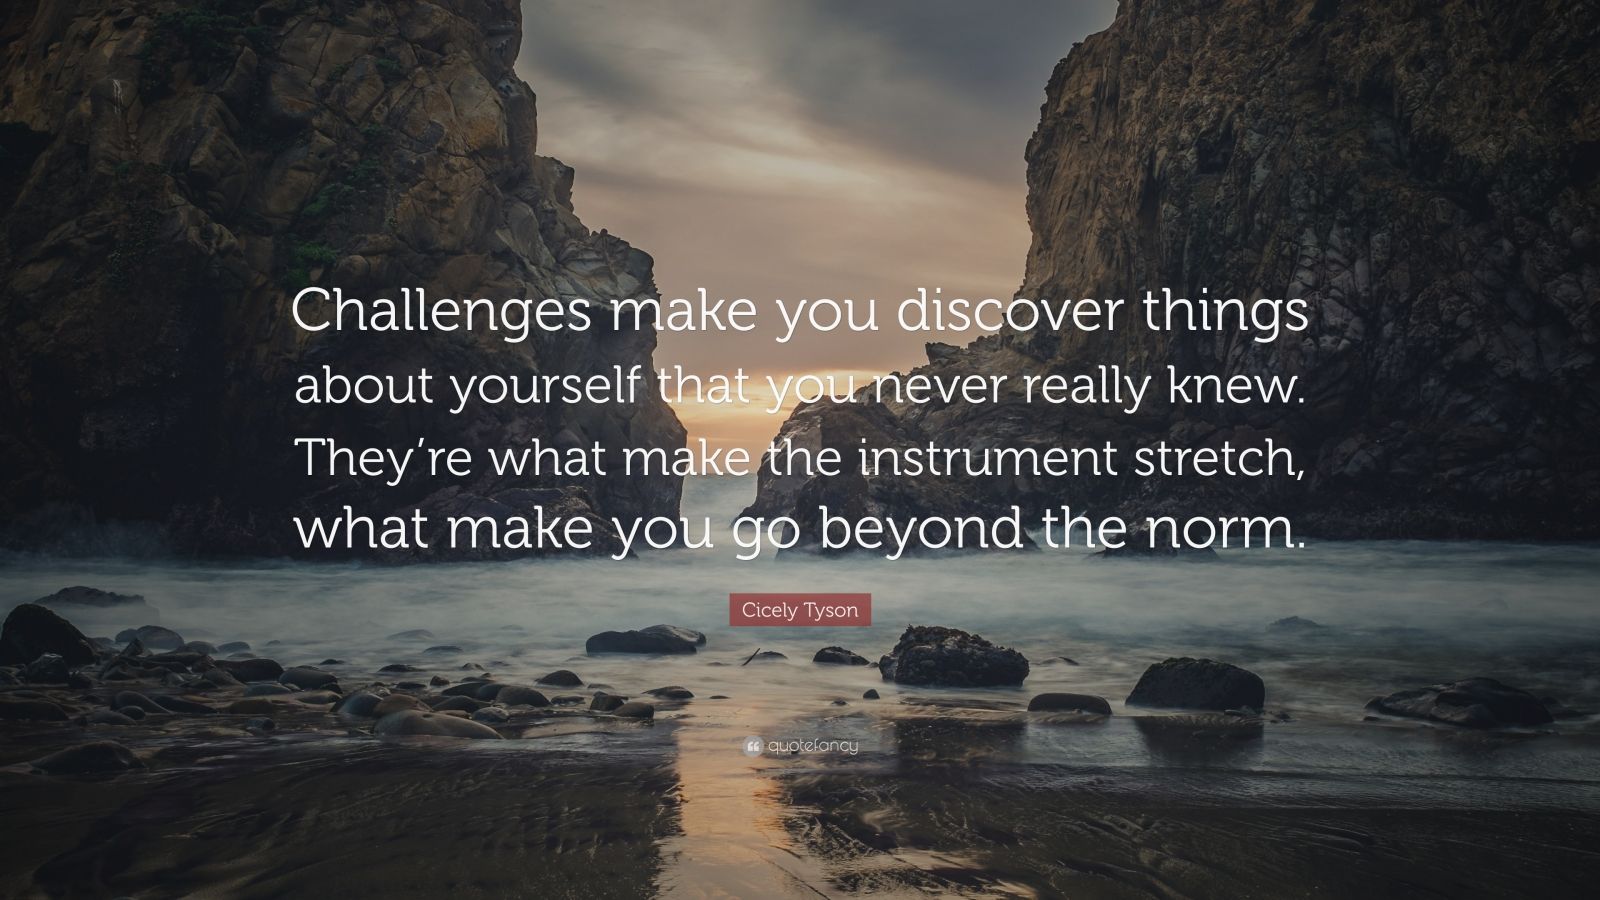 Cicely Tyson Quote: "Challenges make you discover things ...